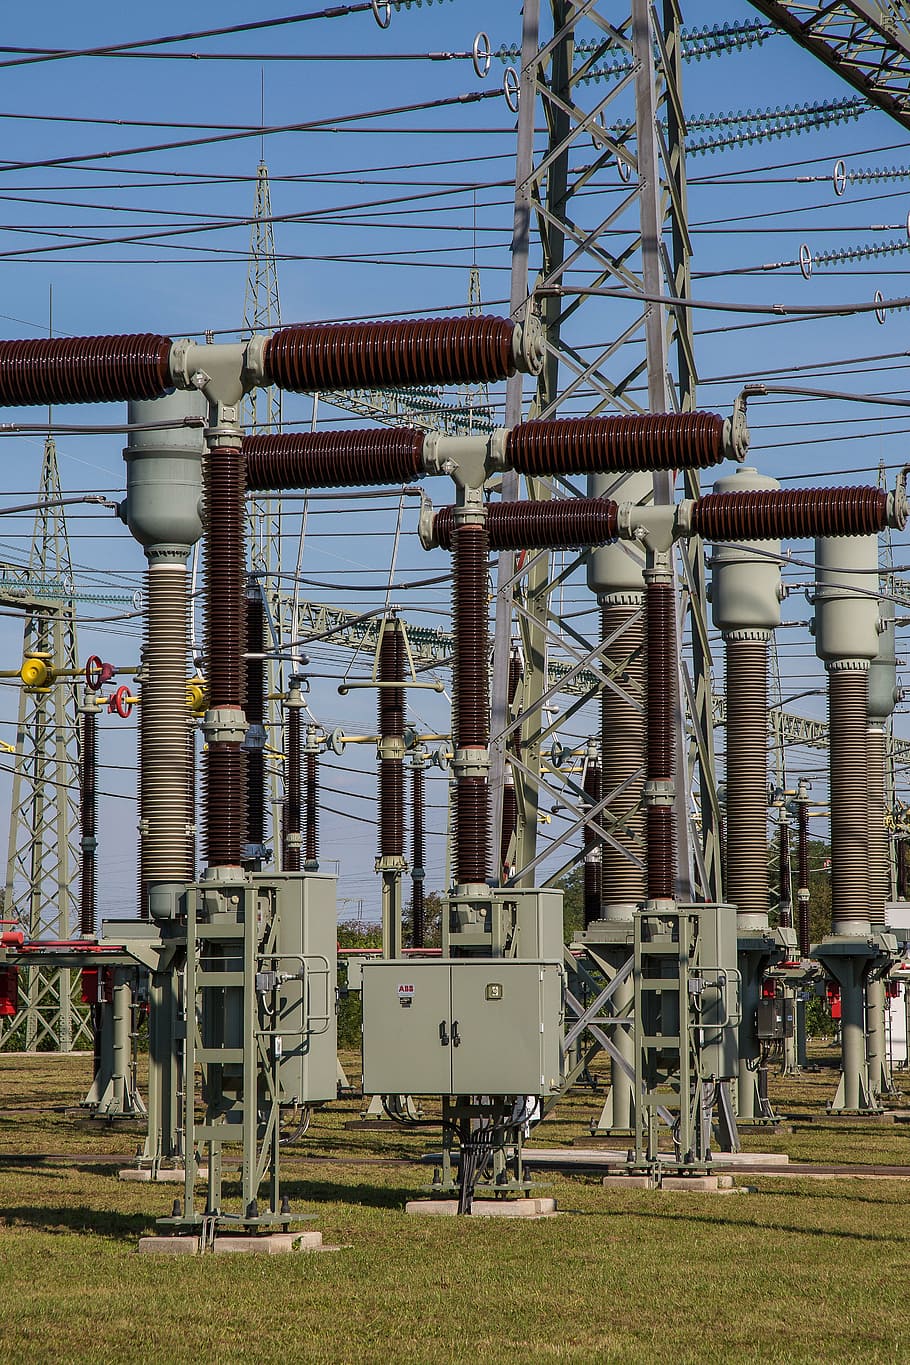 substation, electricity, current, high voltage, transformer, power generation, strommast, industry, electricity Substation, power Line